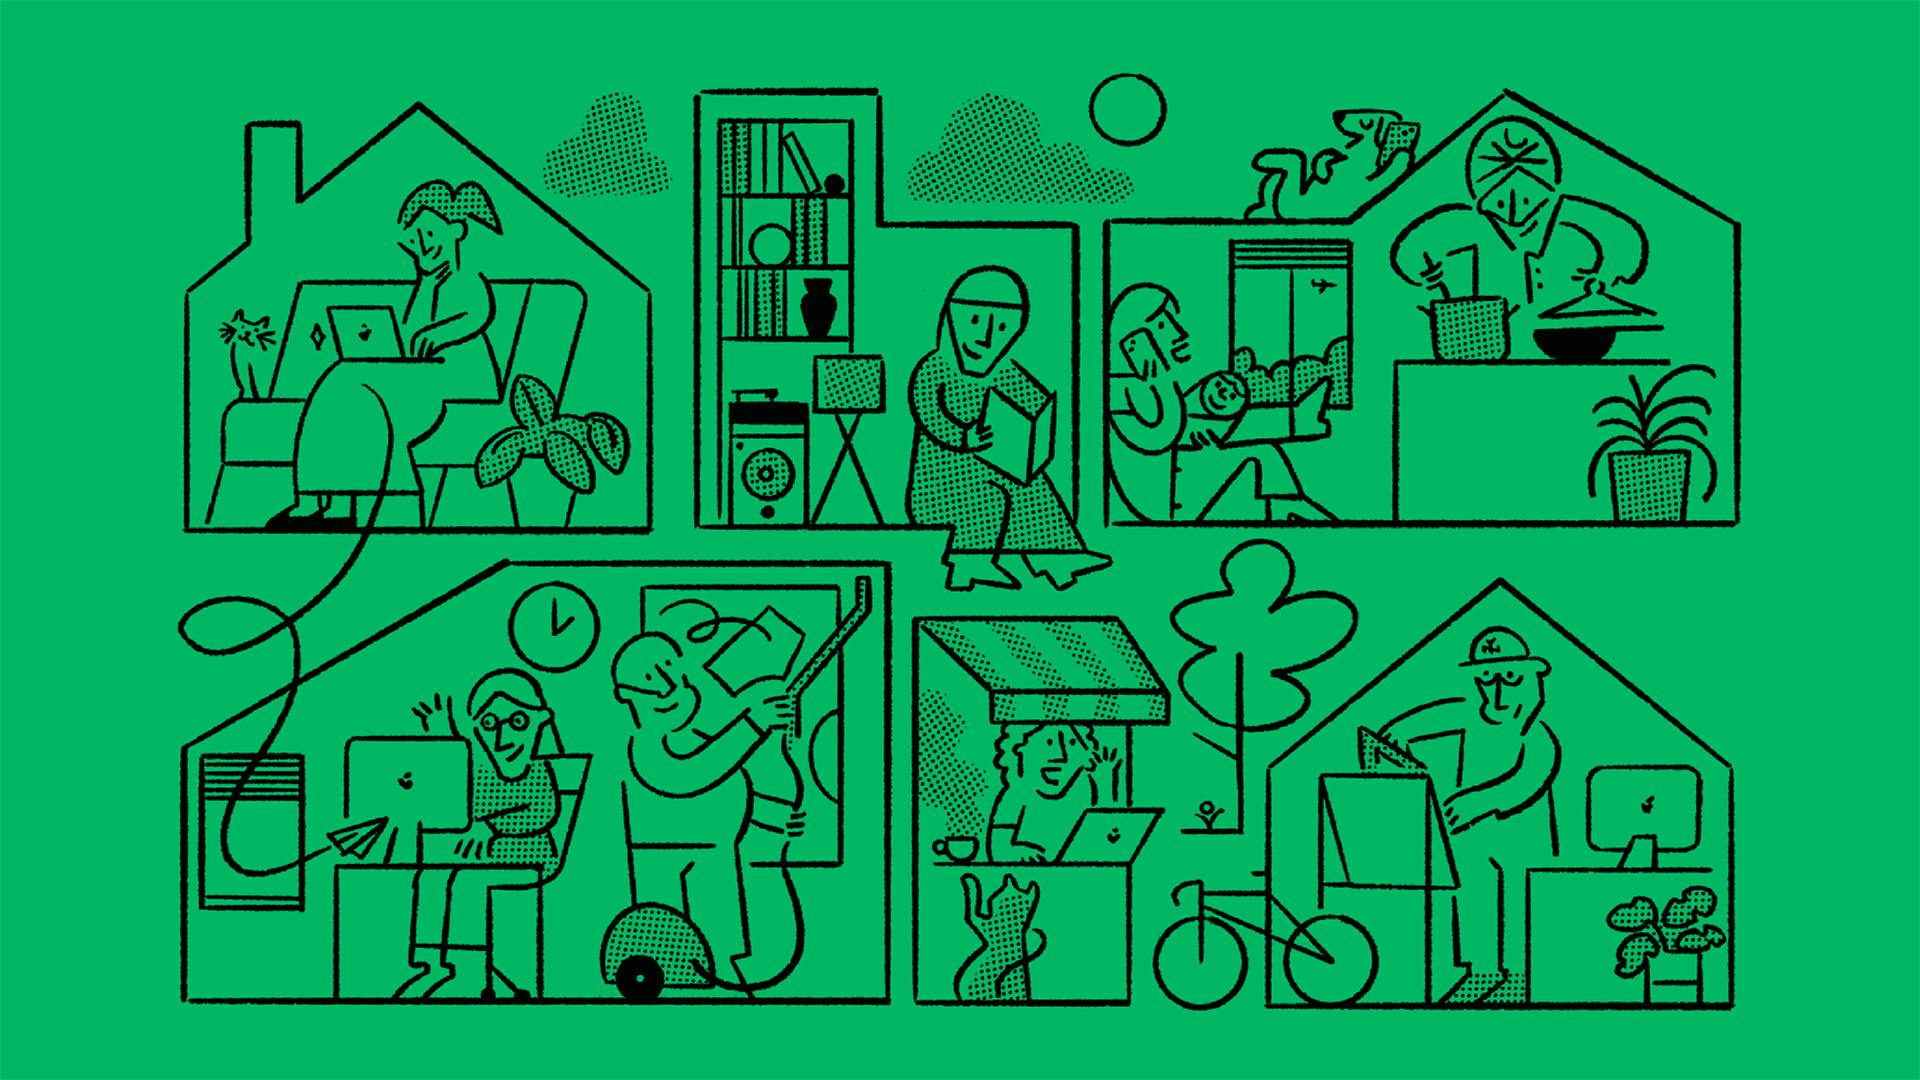 Graphic showing Glassdoor's new line illustrations of cartoon characters inside buildings against a green backdrop